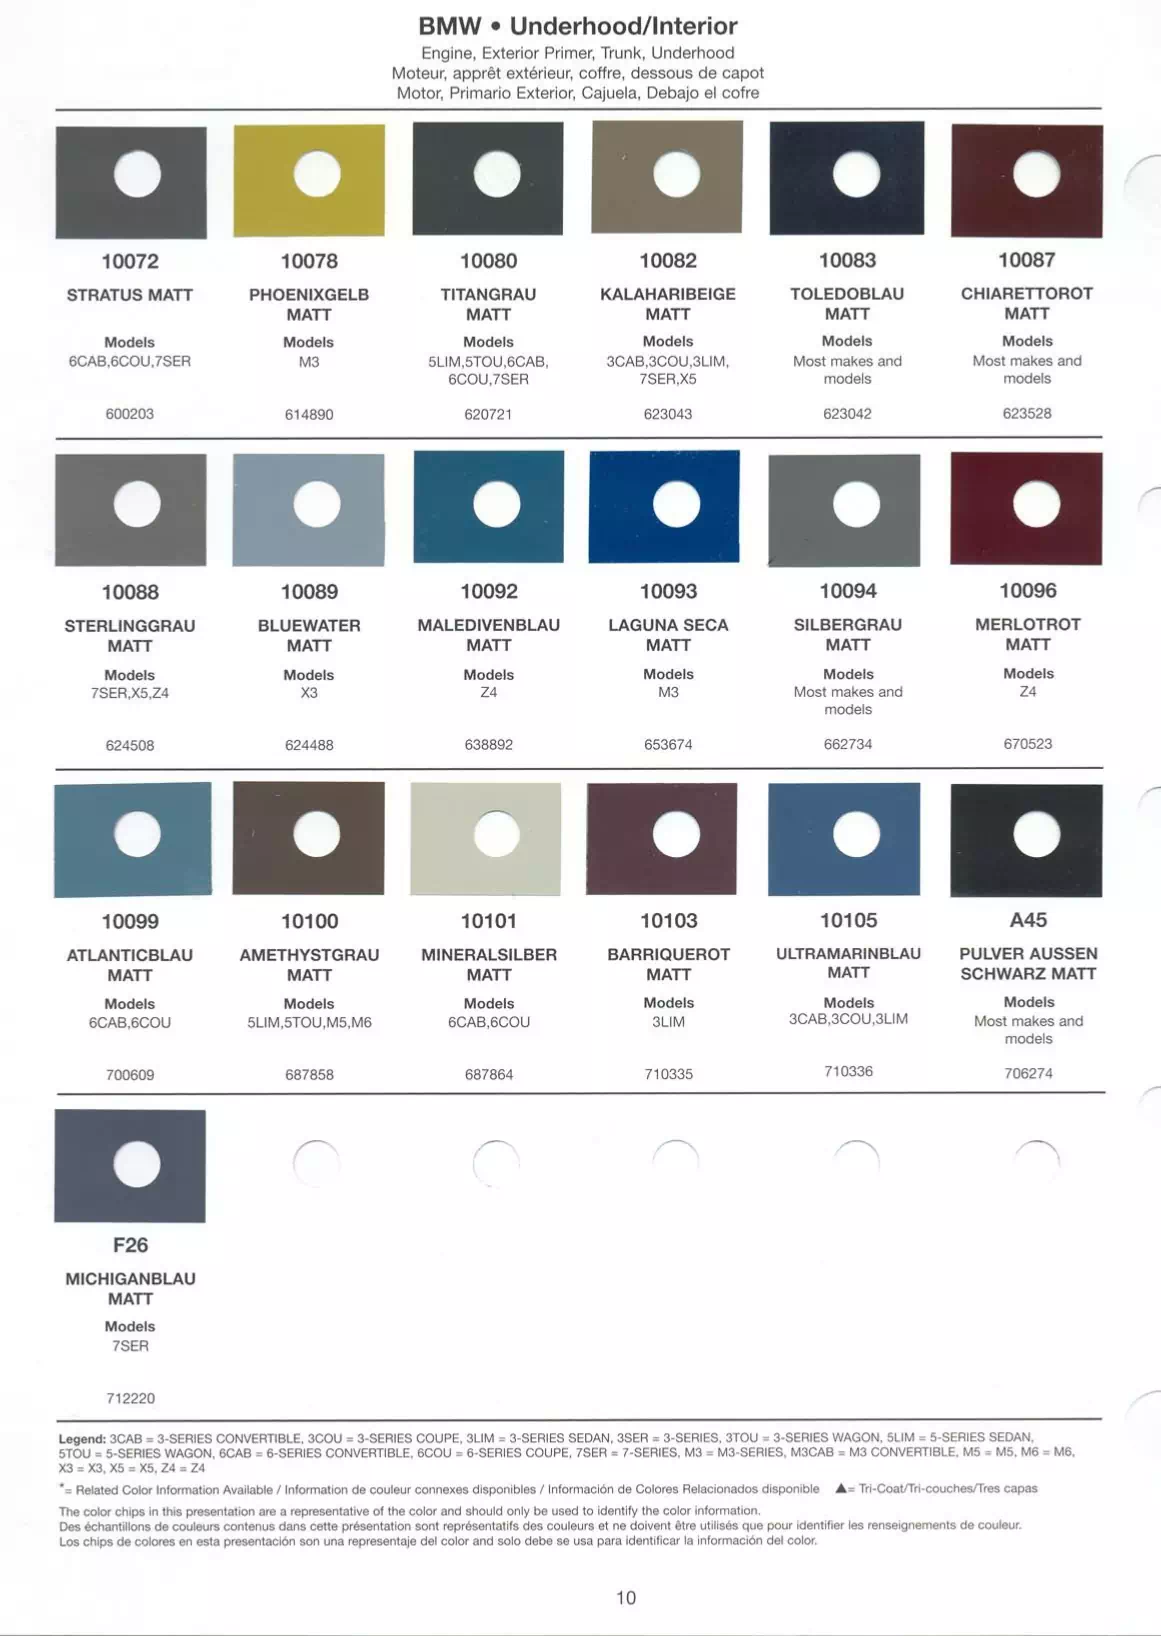 Paint codes for interior, exterior, accent & wheel colors to mix paint or order paint for 2006 bmw's